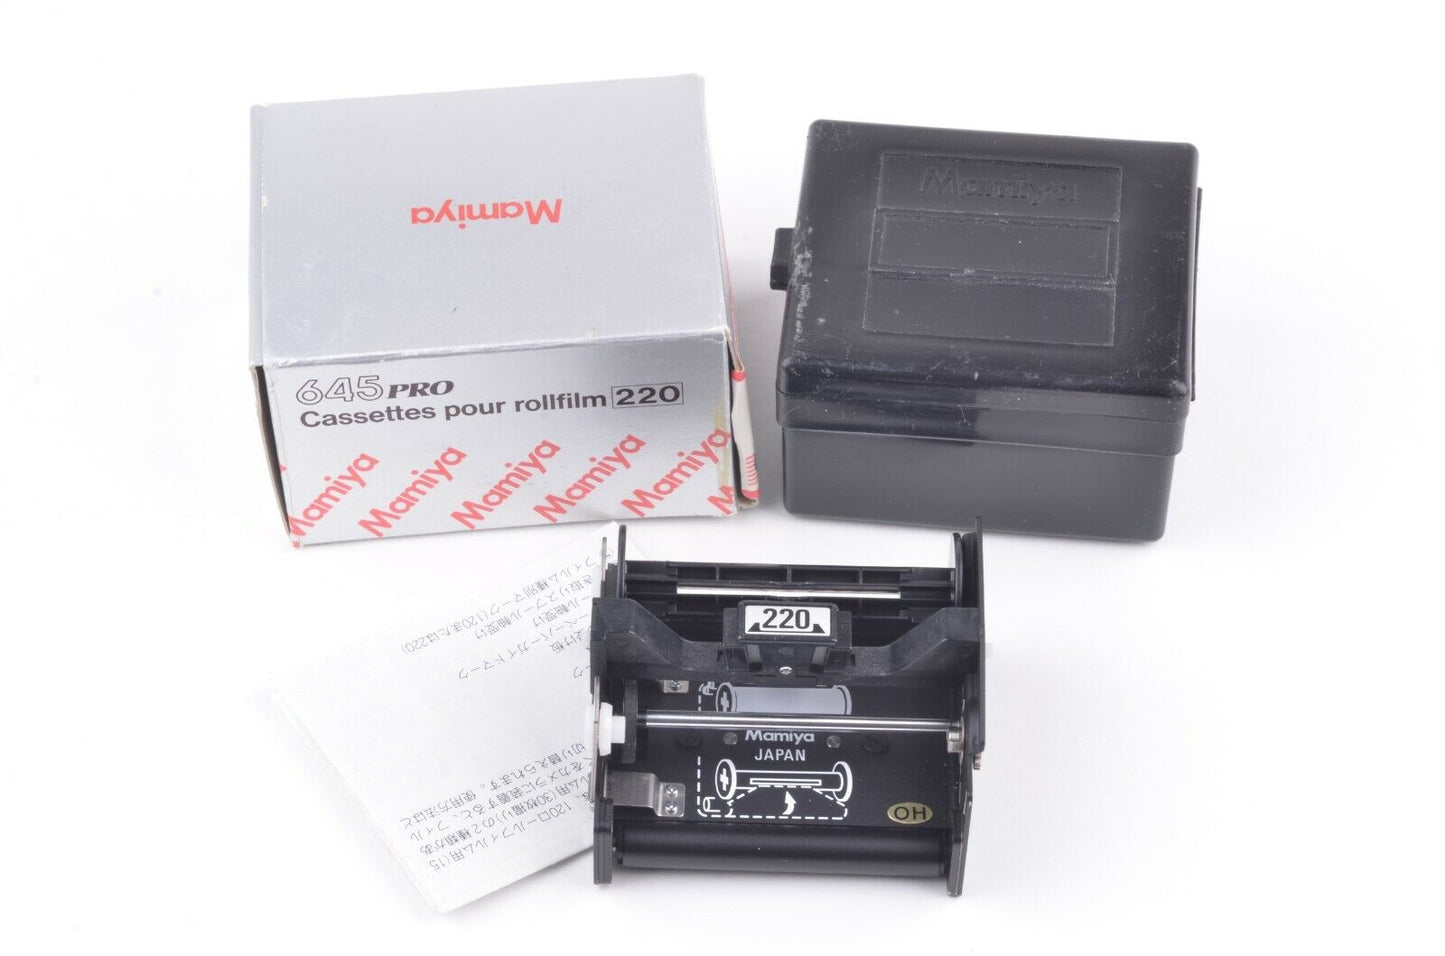 EXC+++ MAMIYA 645 PRO 220 FIM INSERT IN CASE AND BOX, VERY CLEAN